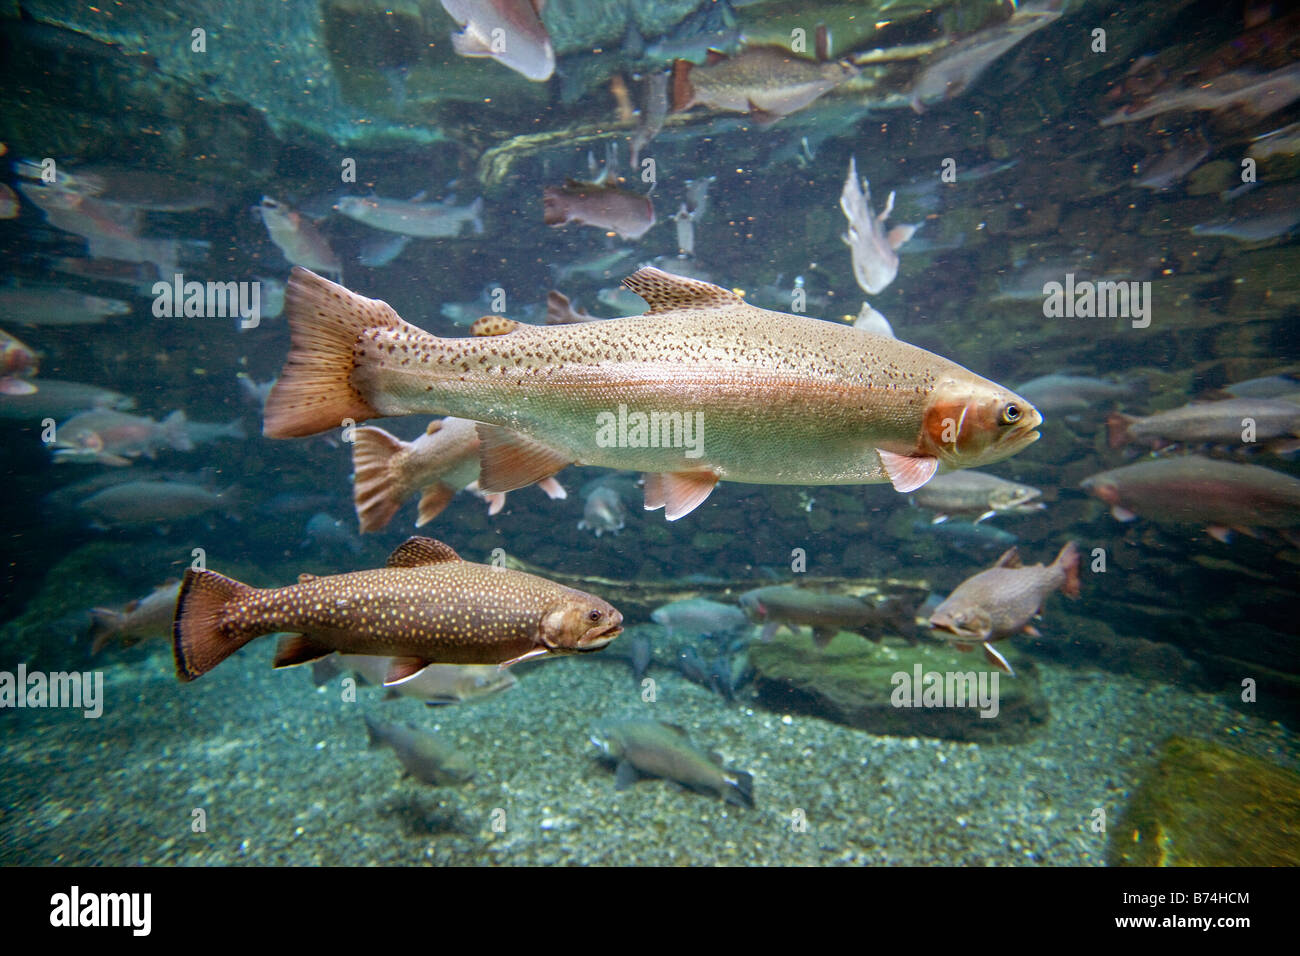 New Zealand, North Island, Rotorua, Rainbow Springs Nature park. Rainbow trout and North American Brook Char trout in captivity. Stock Photo